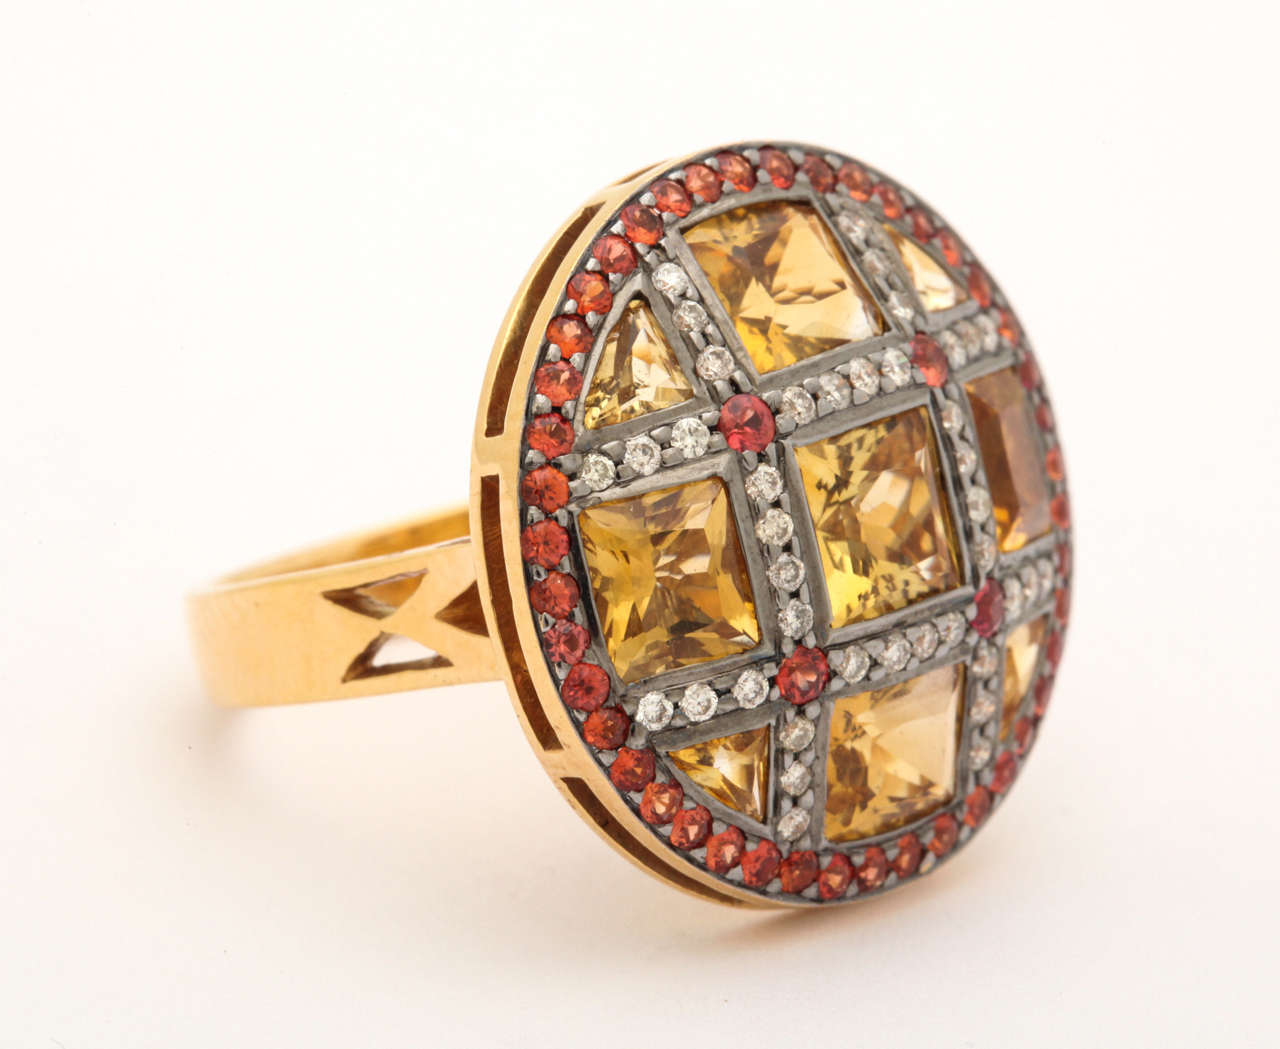 Stunning 18 kt orange gold ring with French cut citrine squares set in a lattice of white dia and red sapphires.. The diameter of the ring is approximately 7/8 in. The red sapphires are African and a sparkly gorgeous red- orange color to compliment